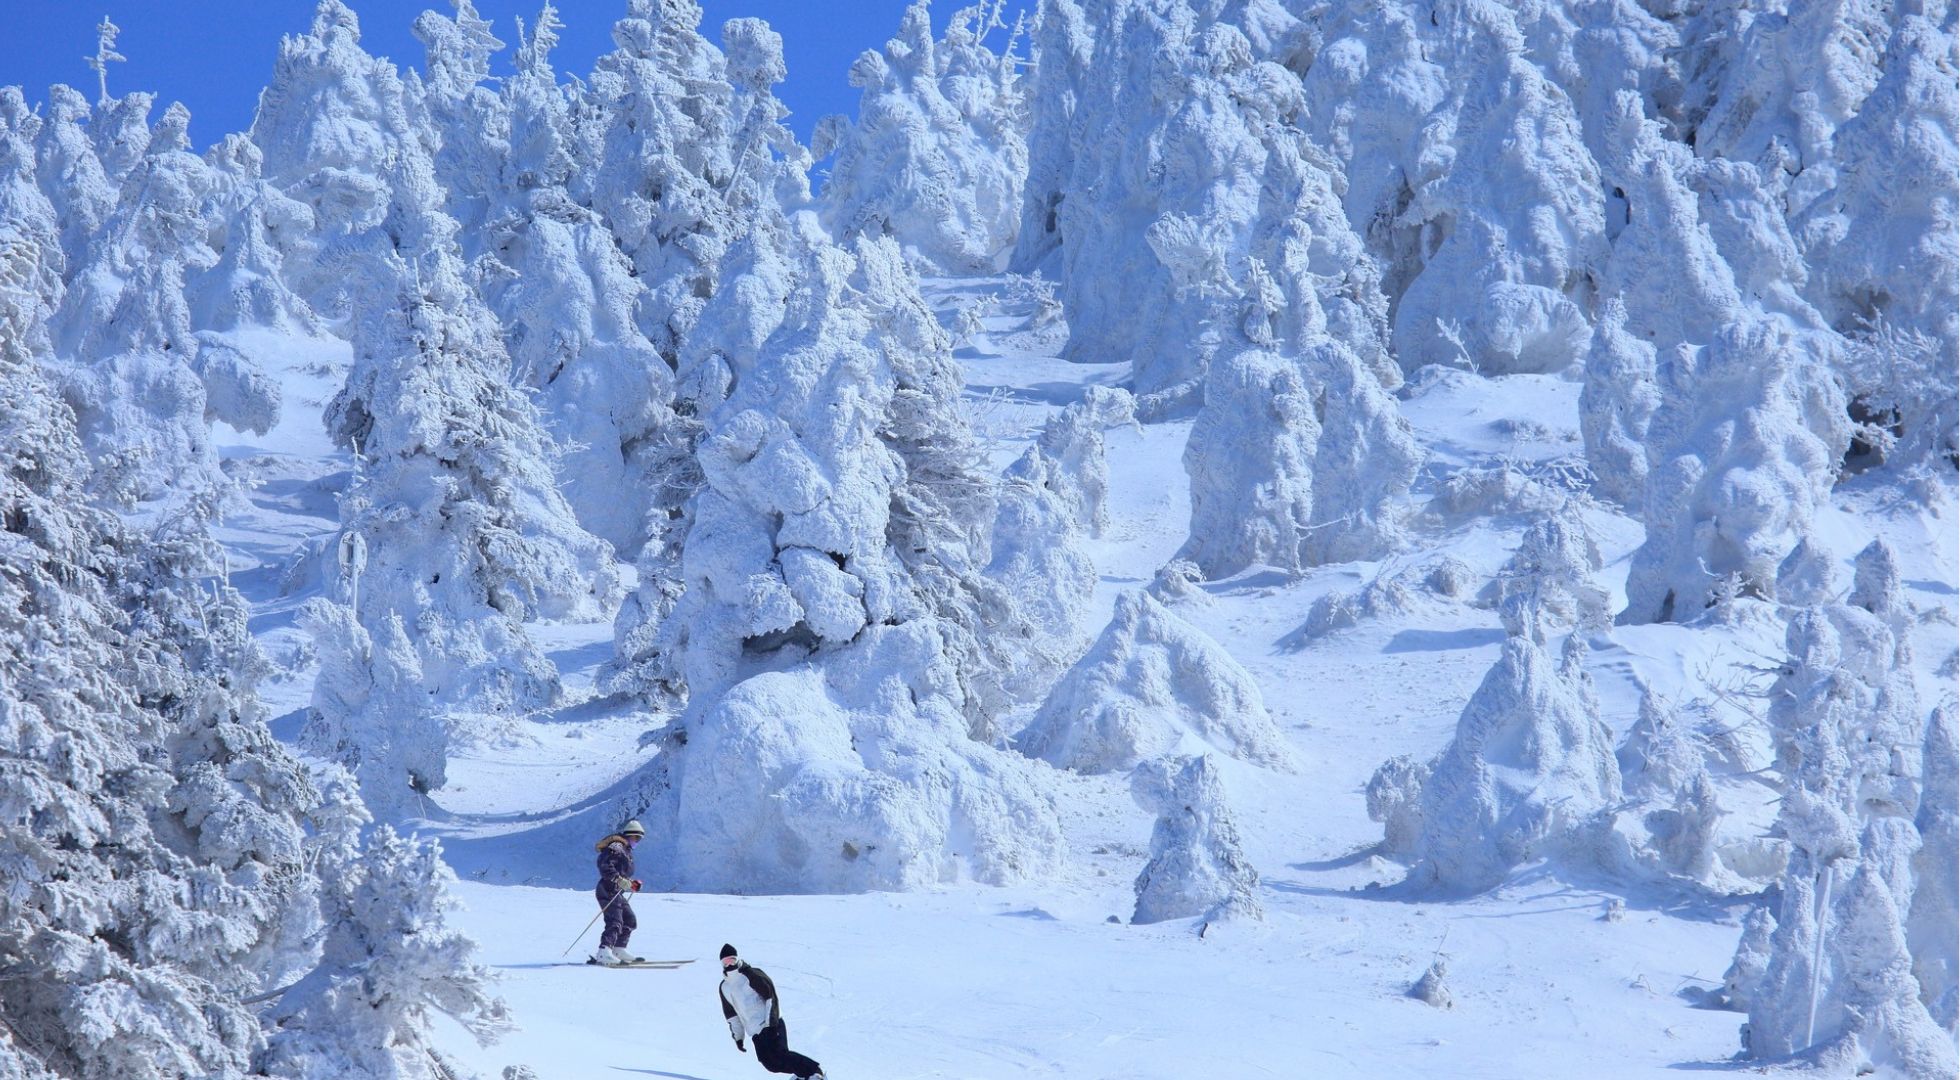 Japan skiing is legendary among the global winter sports community